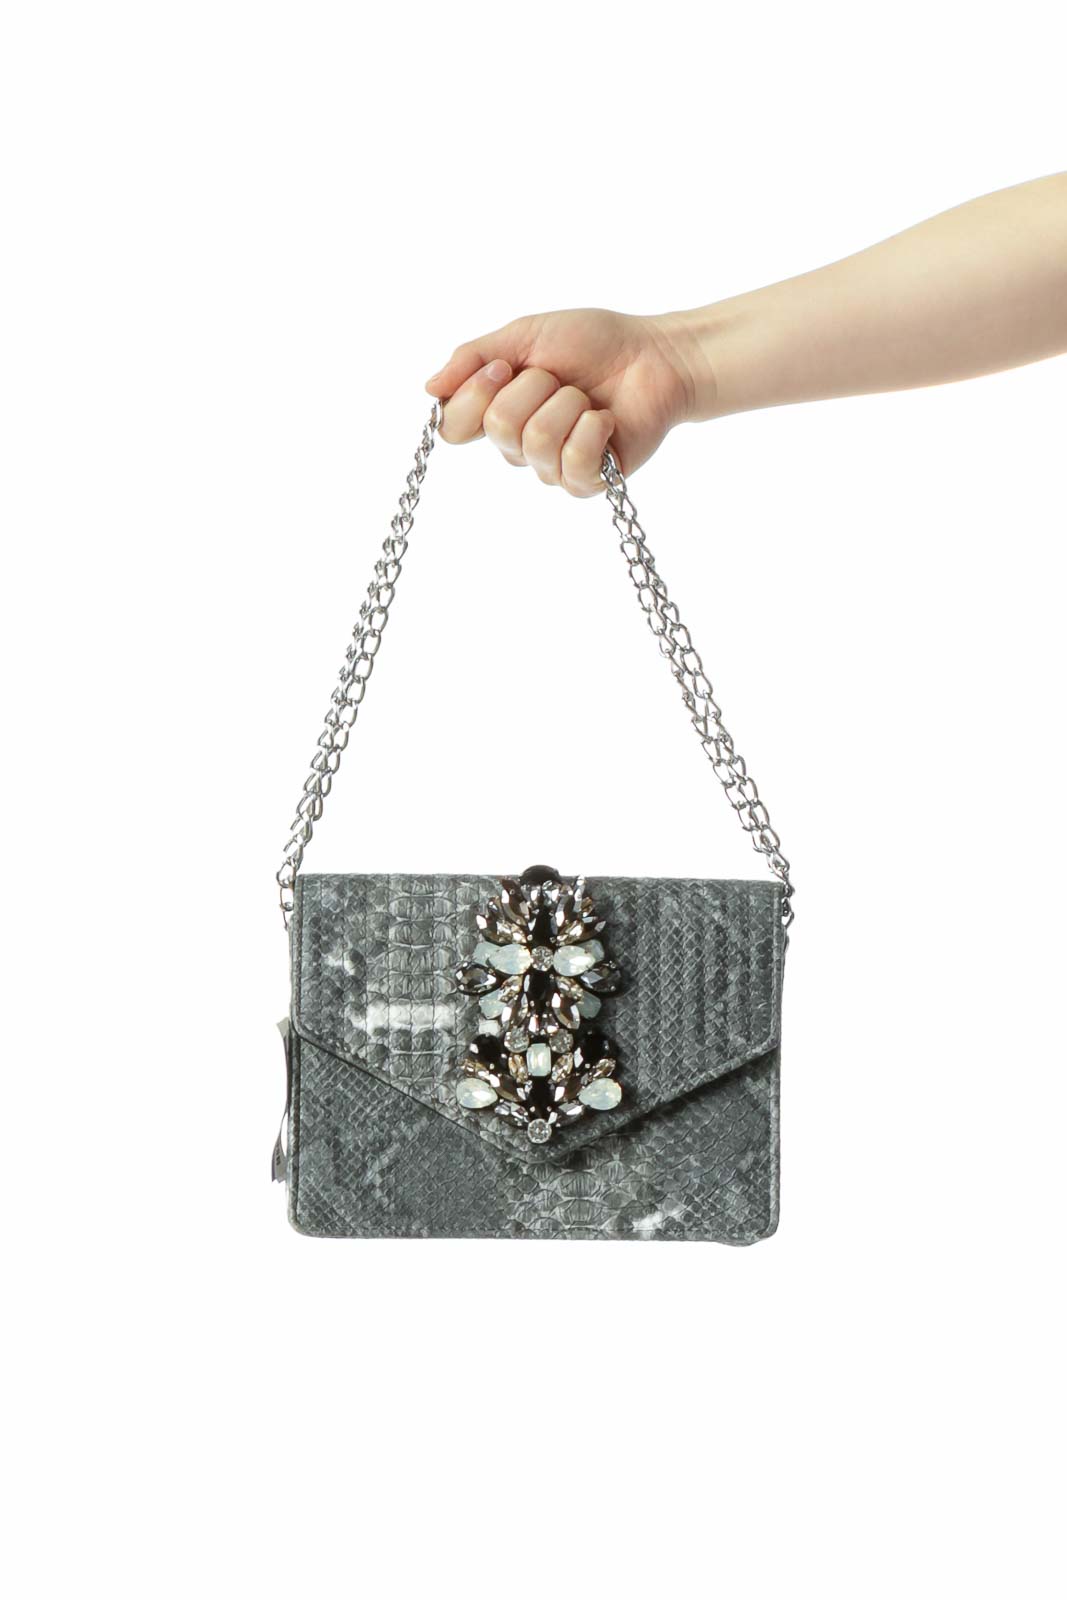 Snake Print Statement Chain Bag Front